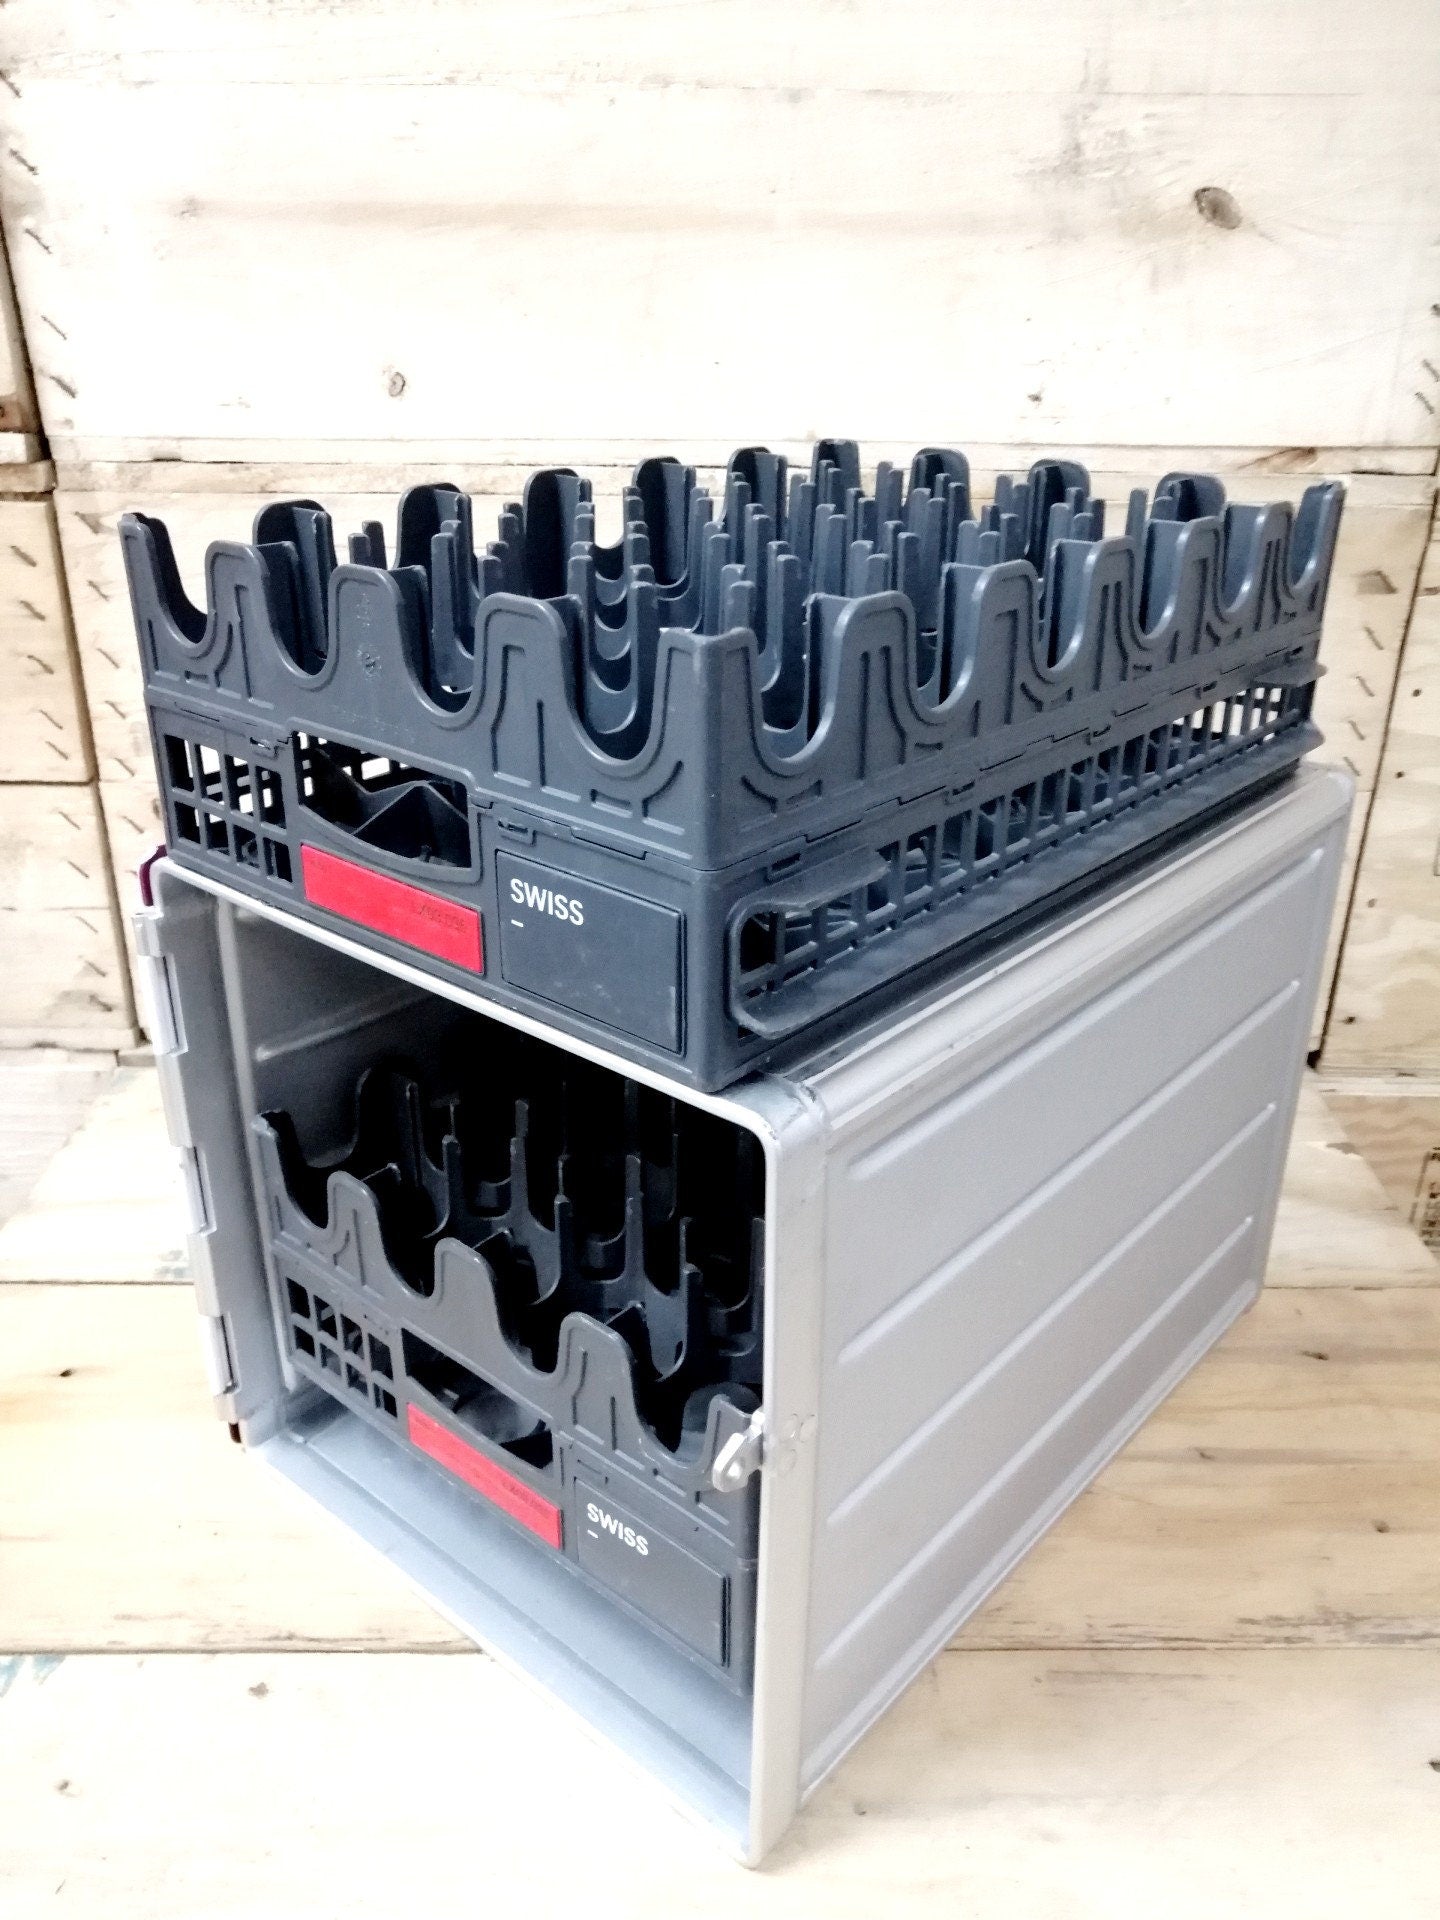 Original SWISS Airlines Drawer & Rack for Glass, Cans, Bottles - Airline KSSU Trolleys, Airlane Containers, Airplane KSSU / Atlas Containers